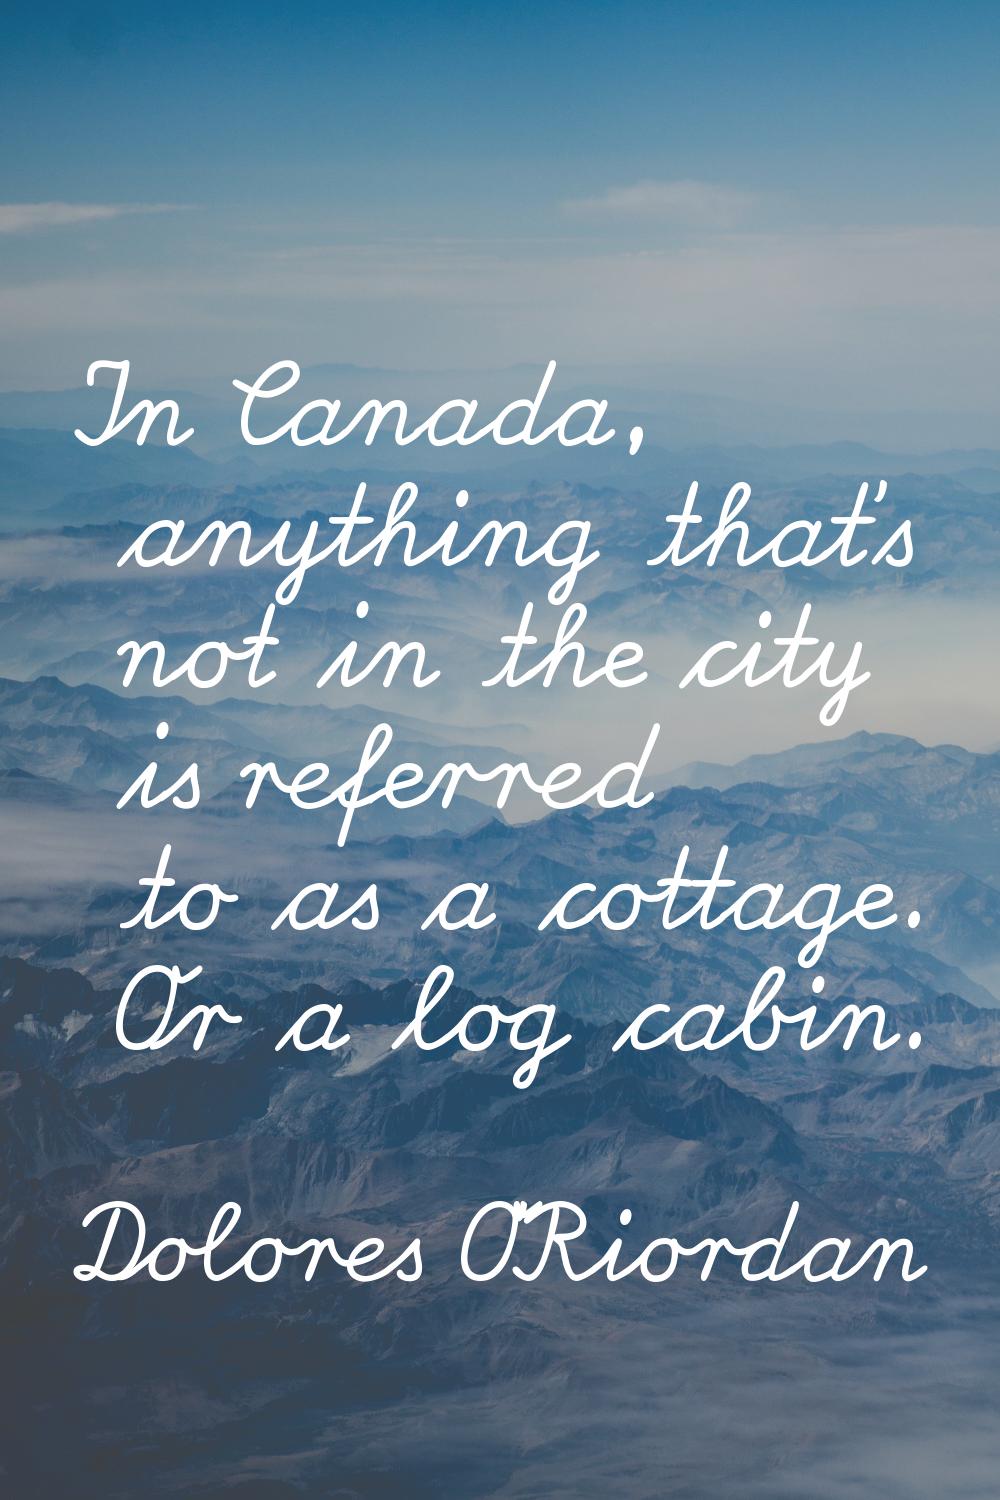 In Canada, anything that's not in the city is referred to as a cottage. Or a log cabin.